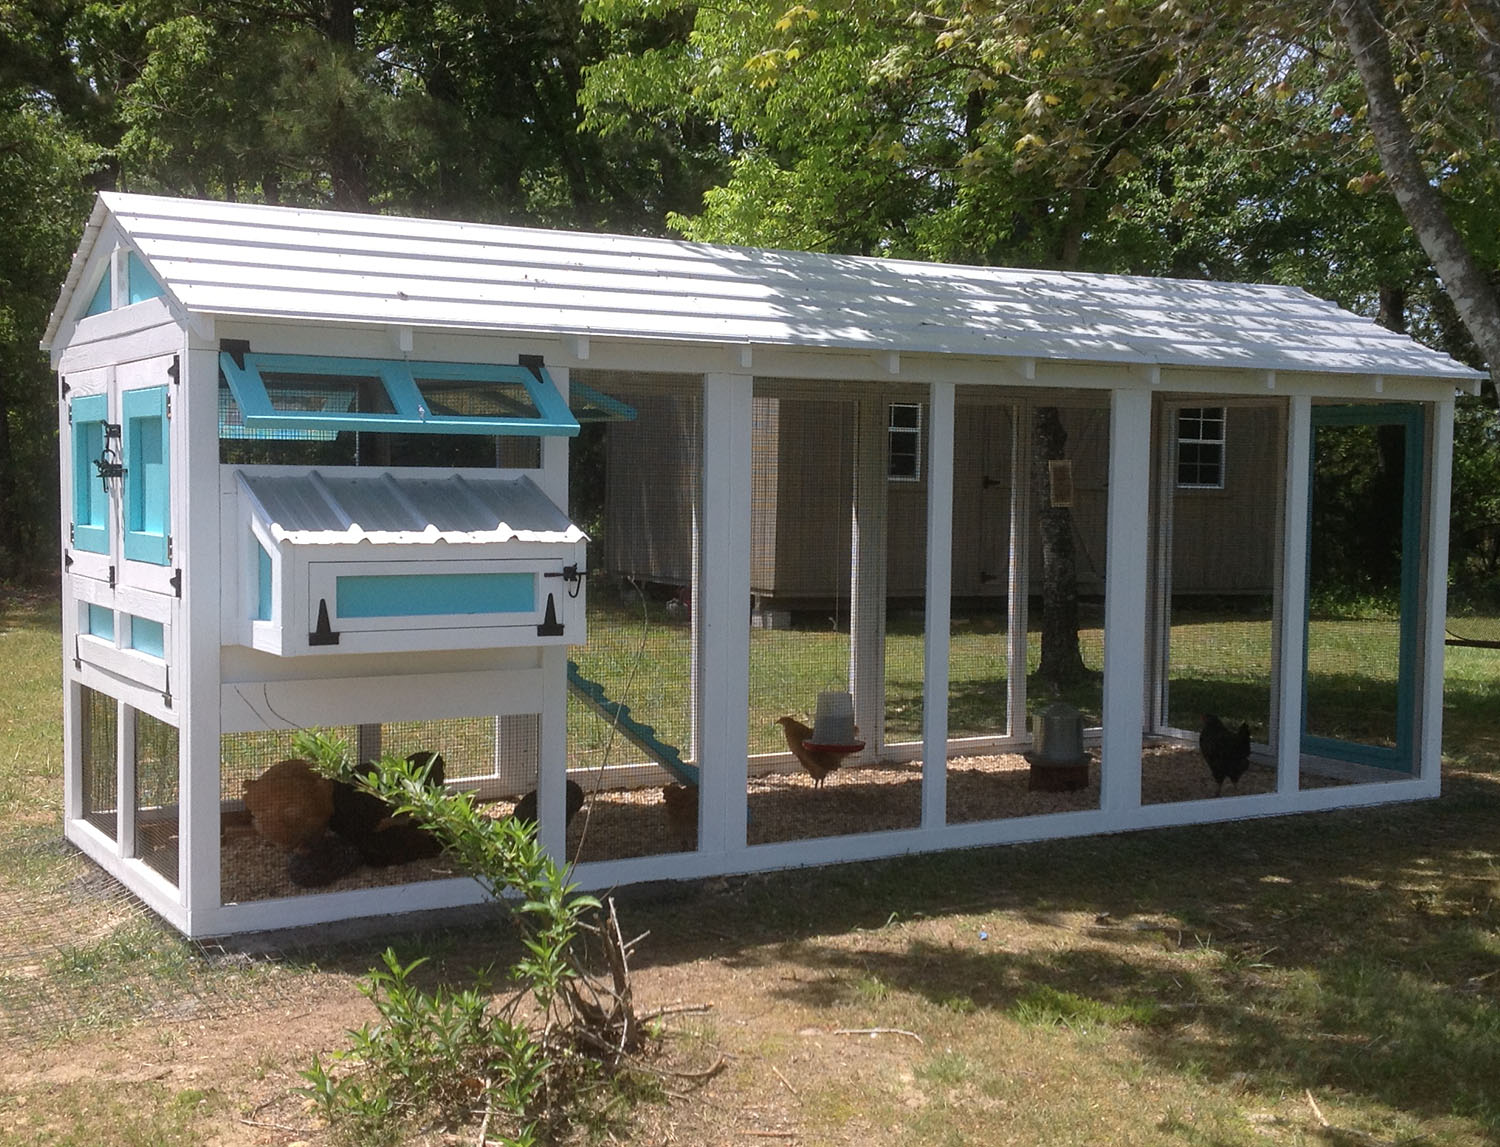 6′ x 18′ American Coop with 4′ x 6′ henhouse in blue and white